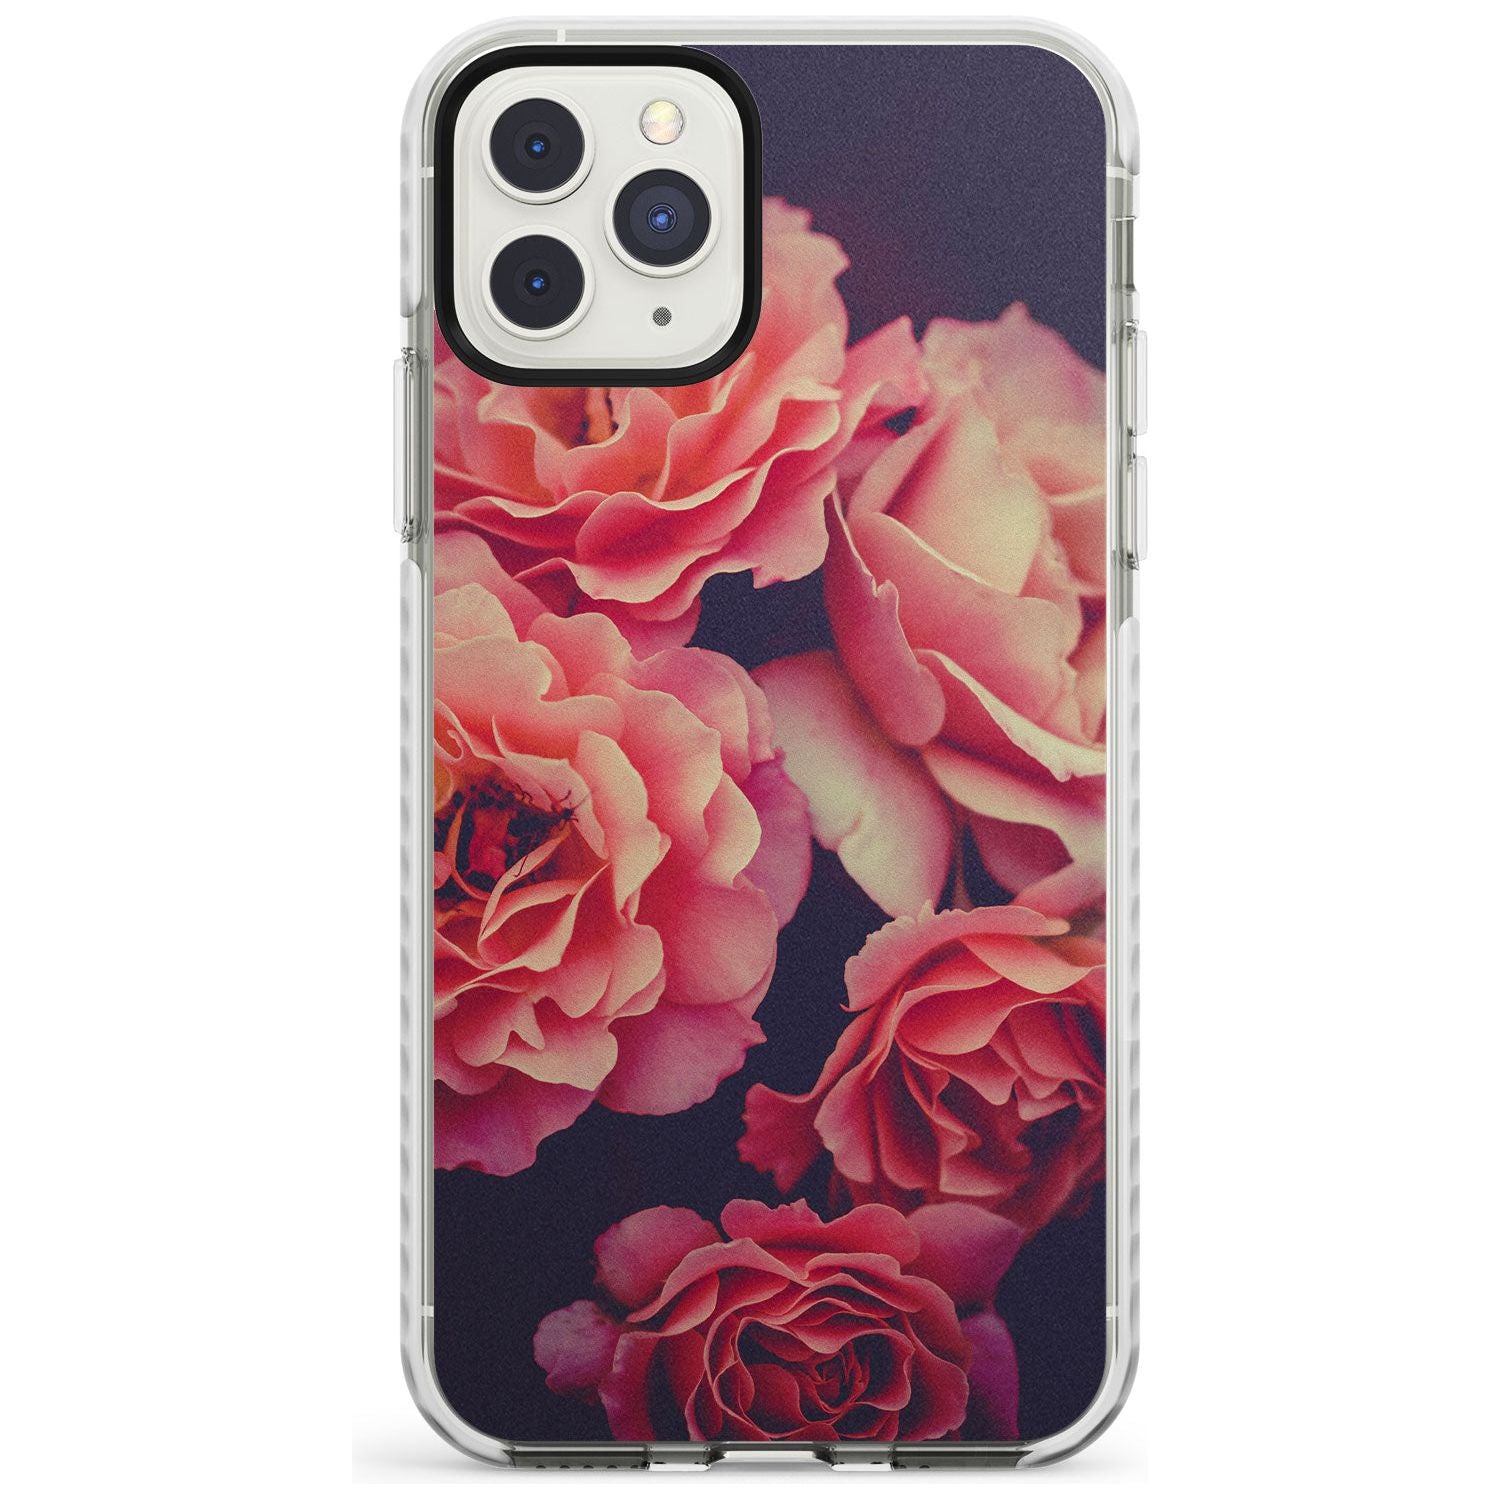 Pink Roses Photograph Impact Phone Case for iPhone 11 Pro Max